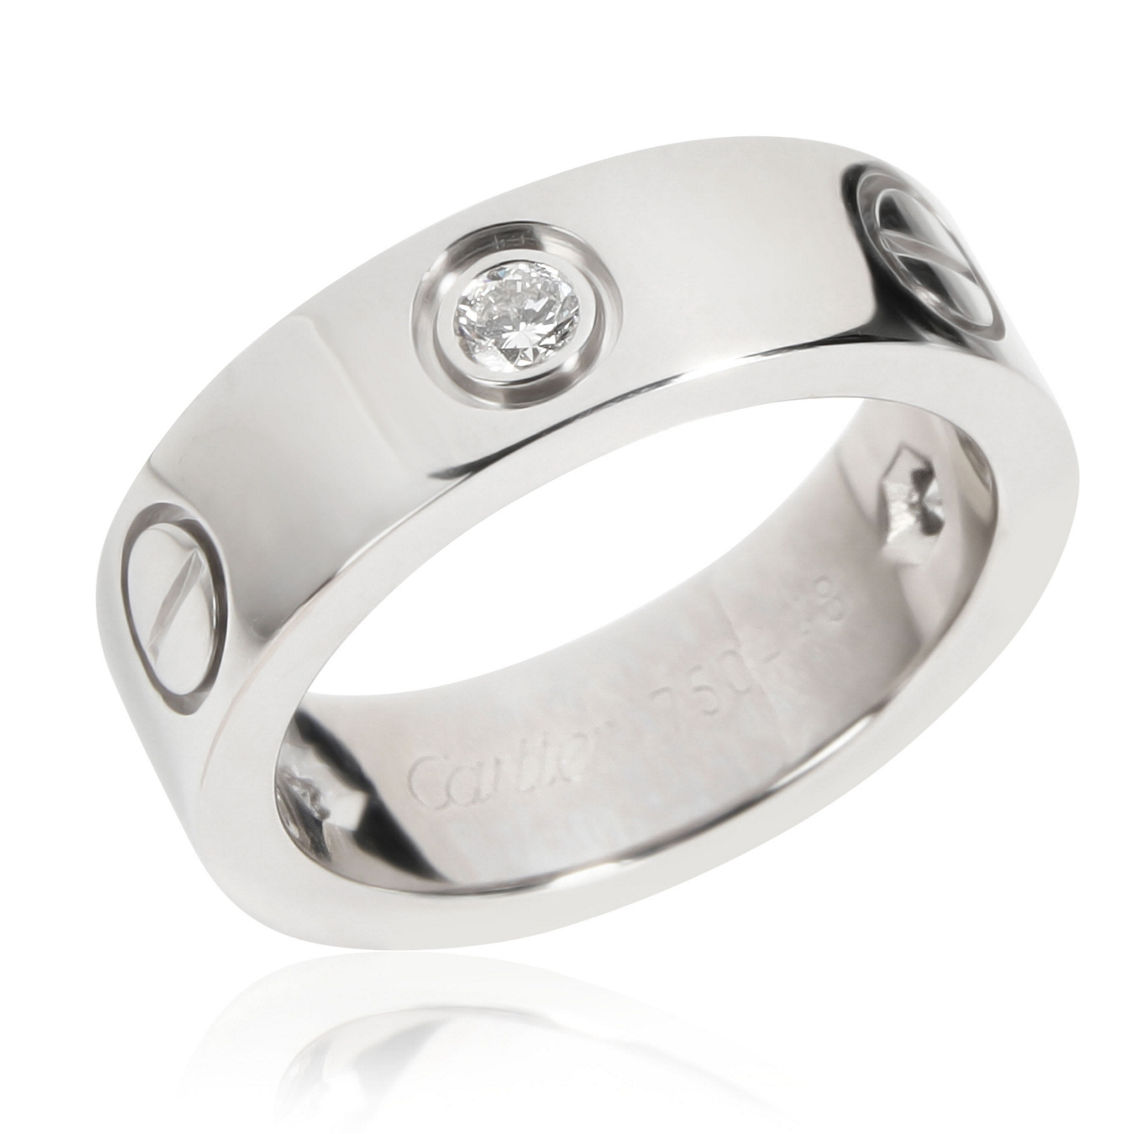 Cartier Love Ring Pre-Owned - Image 3 of 3